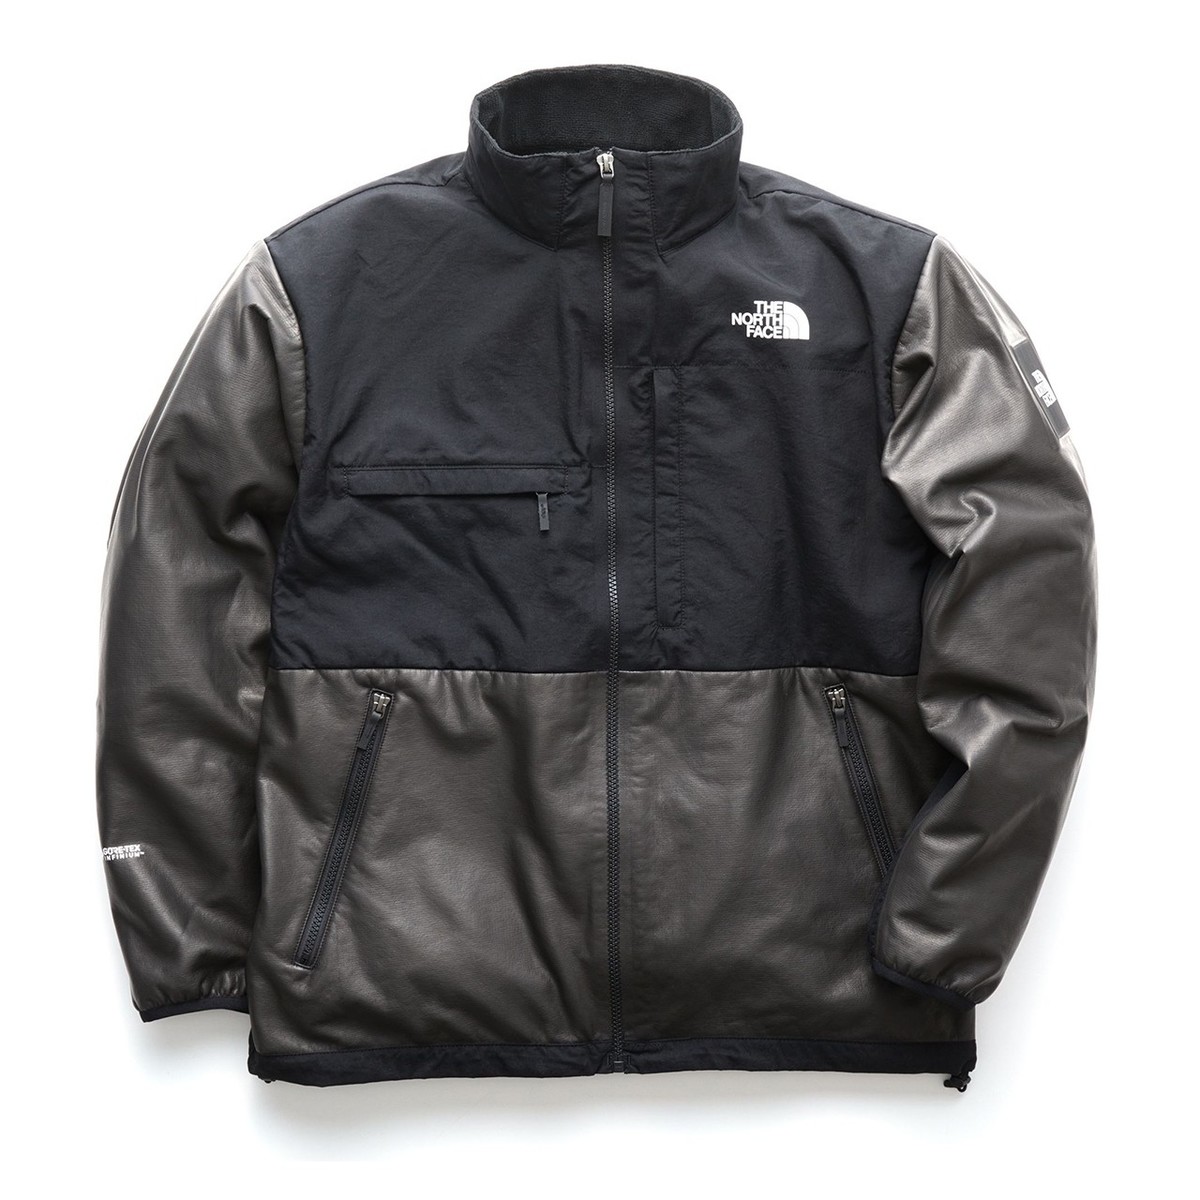 North Face Release New Gore-Tex Outerwear